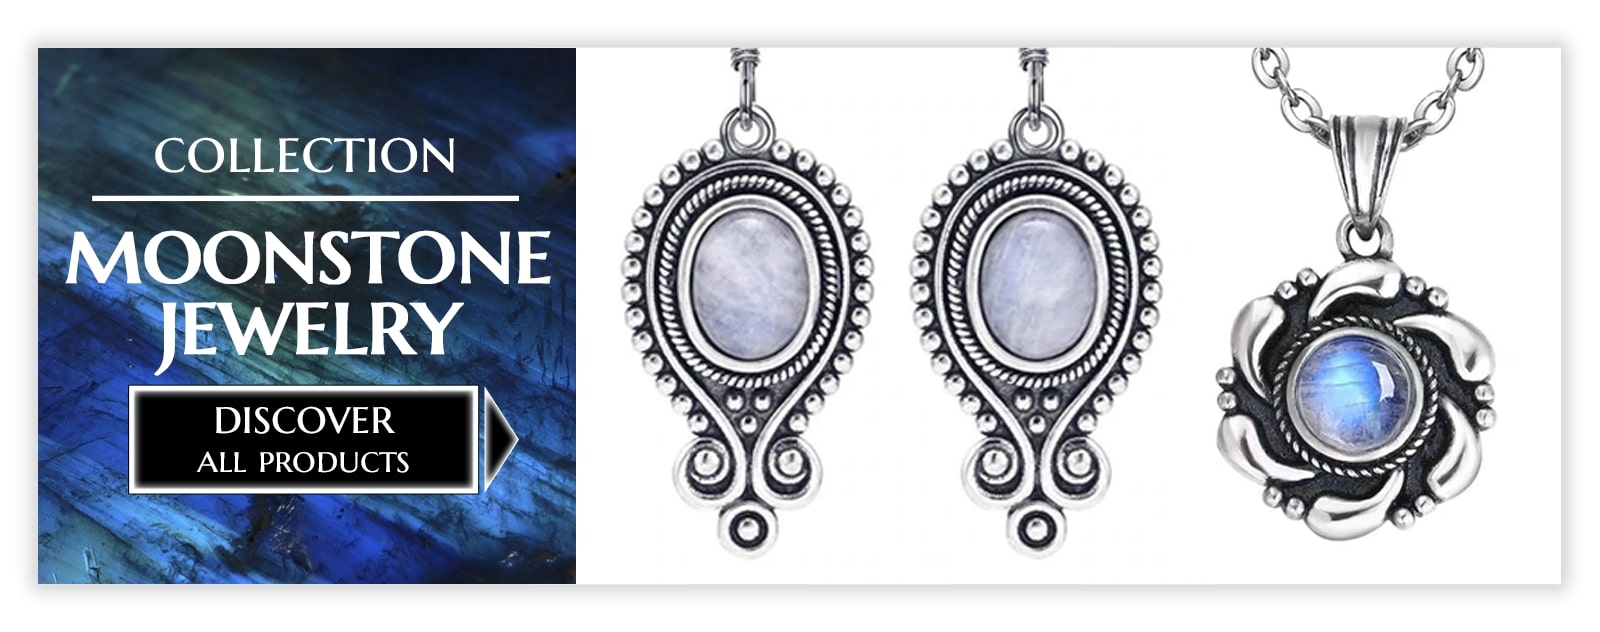 moonstone jewelry collection